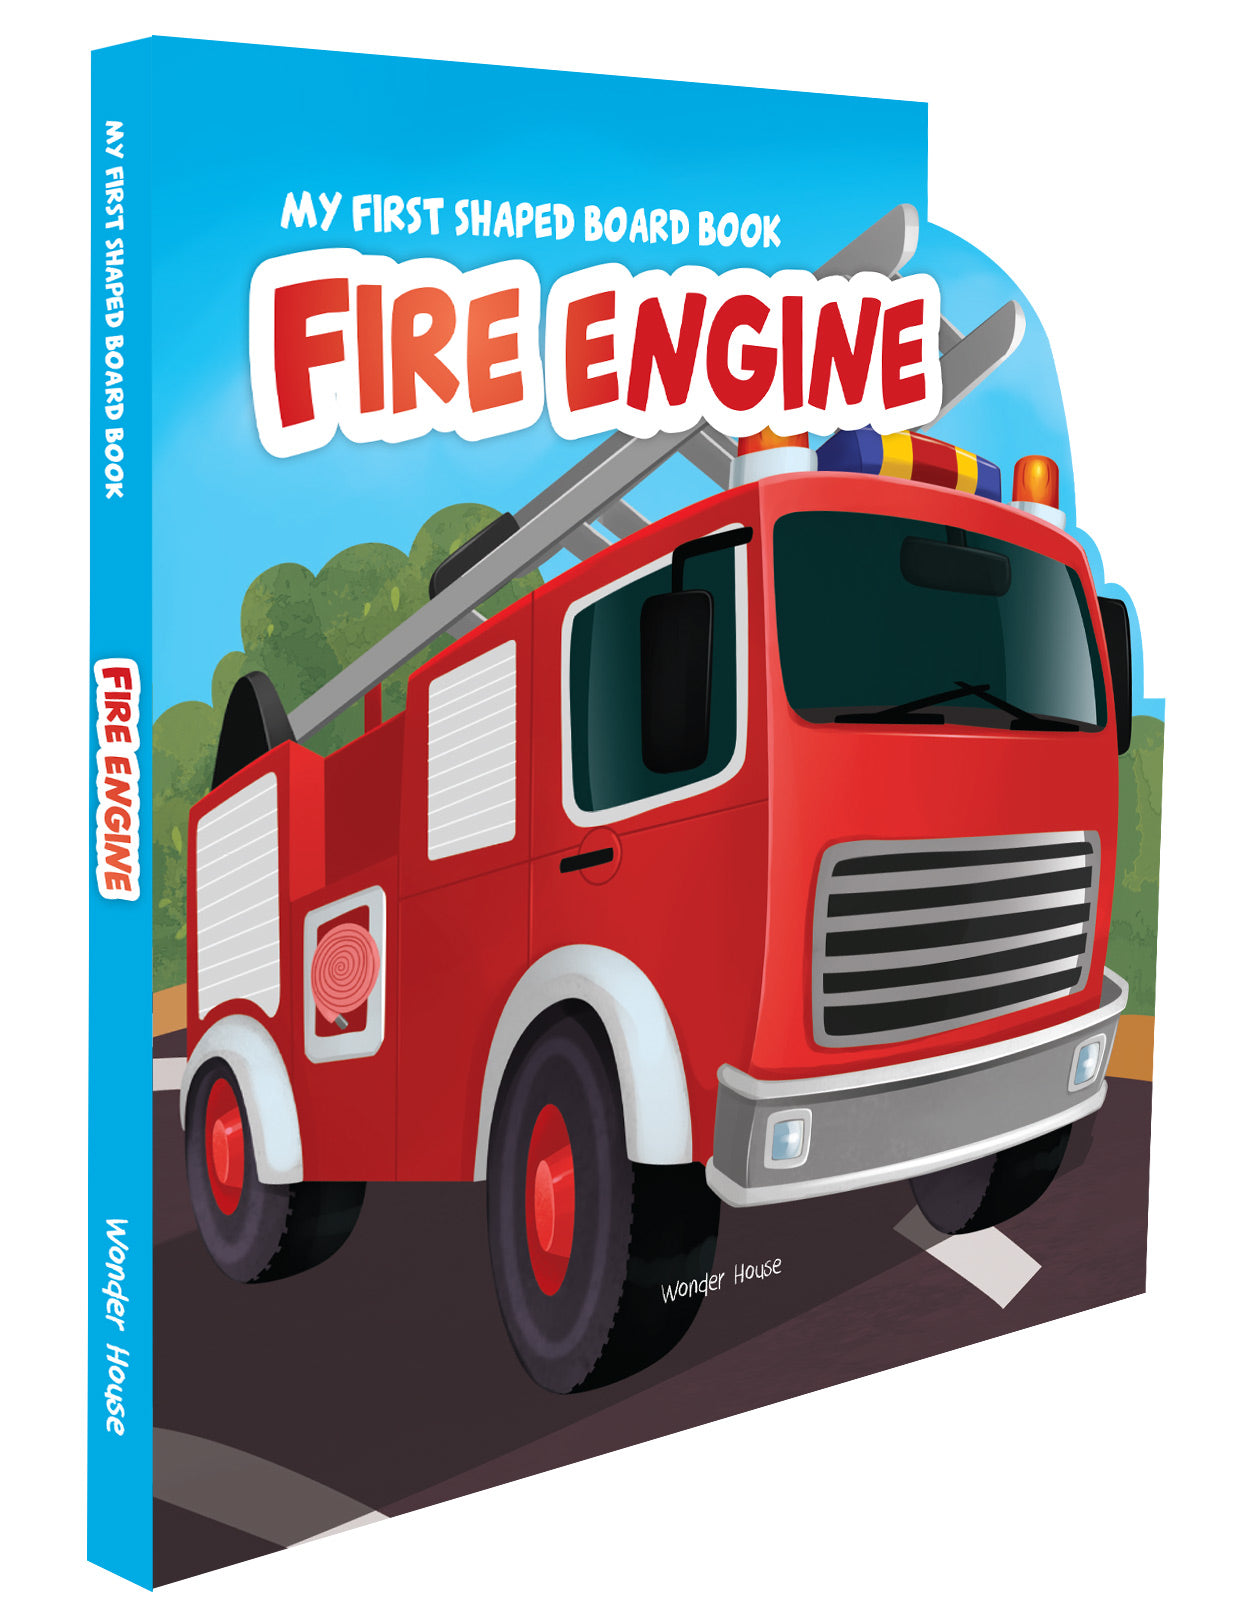 My First Shaped Board Books For Children: Transport - Fire Engine